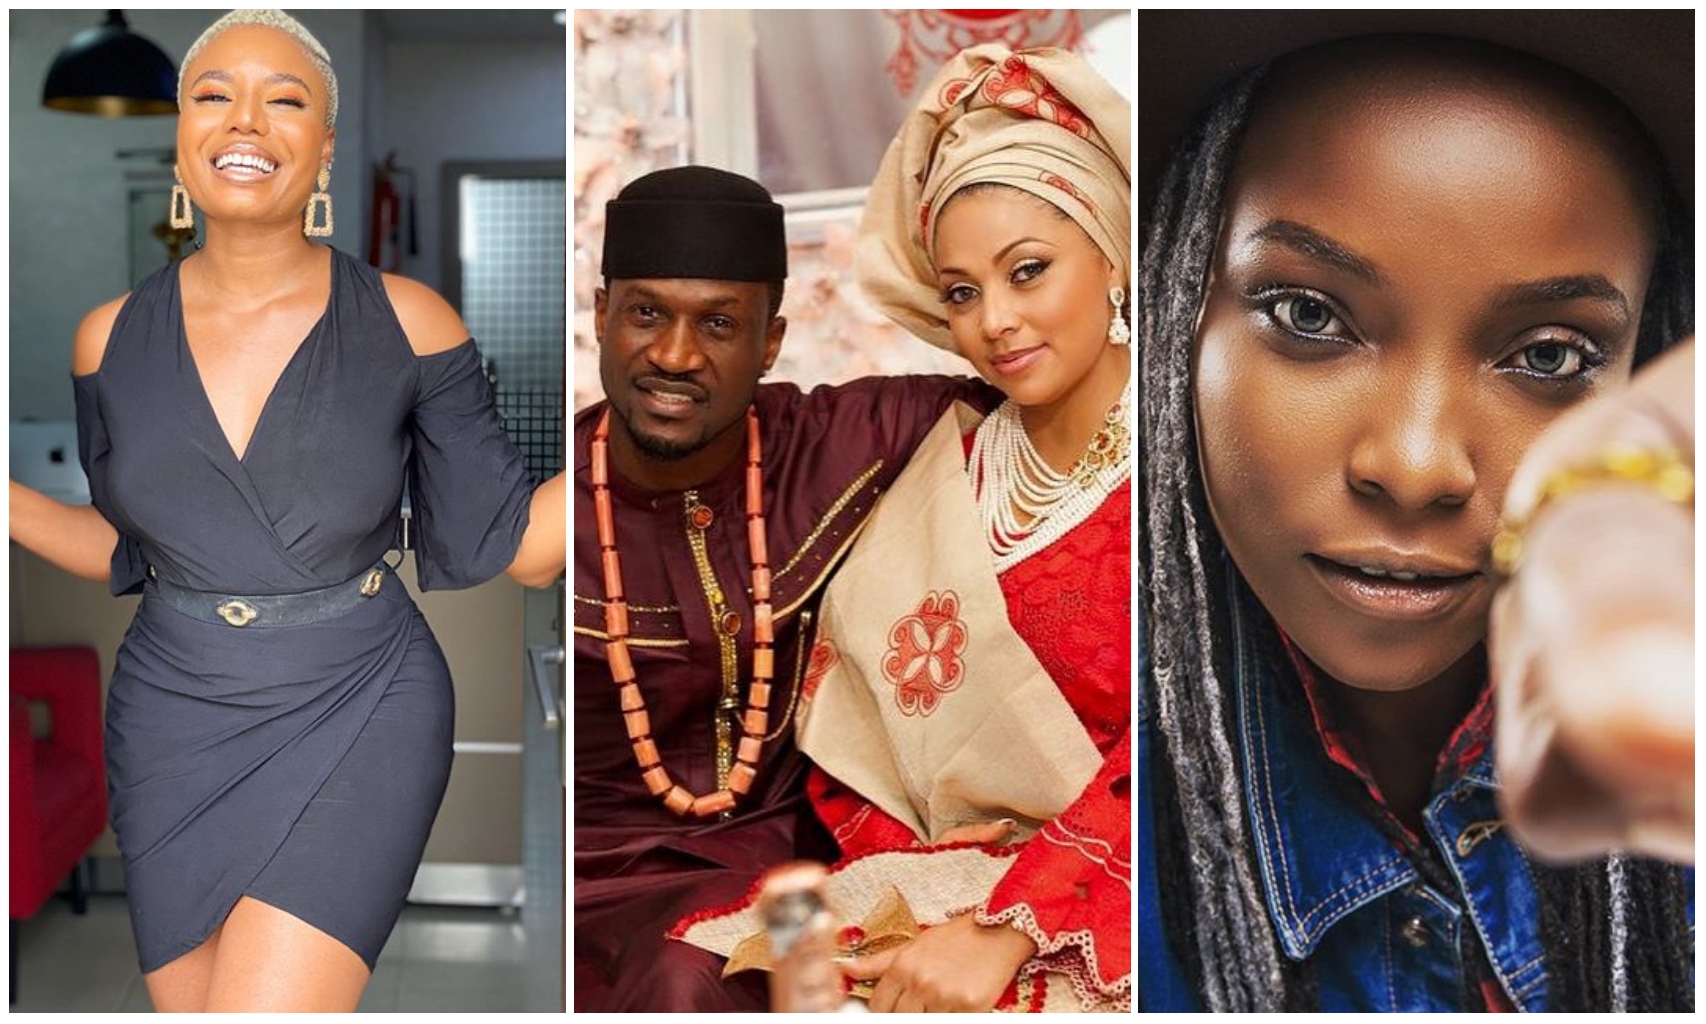 'Glad you and your family are alive' – Nancy Isime, DJ Switch others reacts to Peter Okoye's Covid-19 story (Photos)